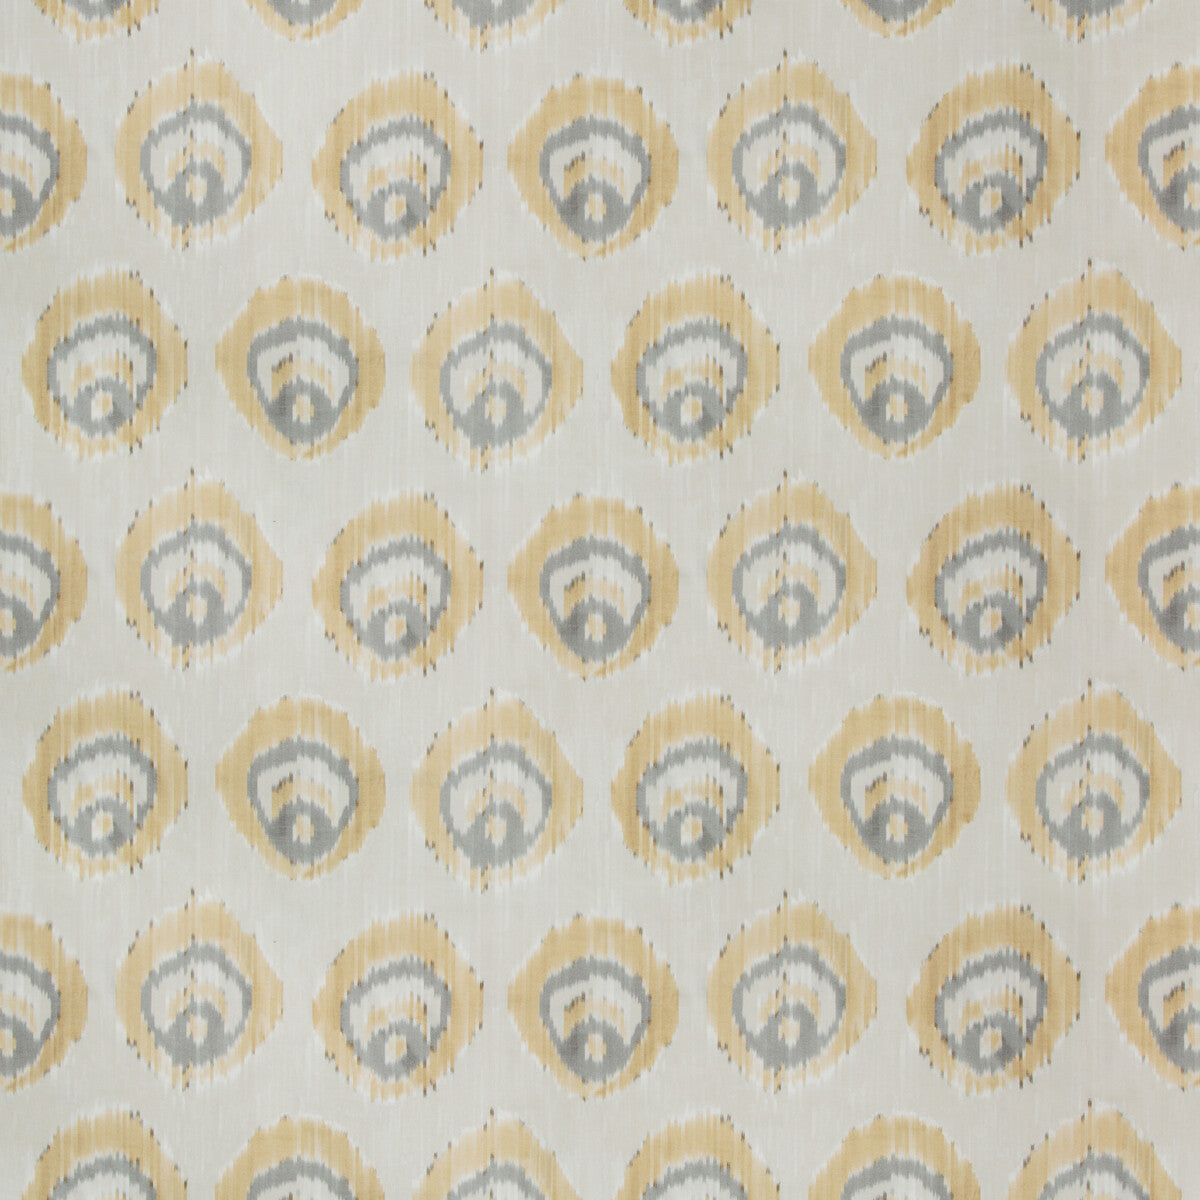 Monaco Print fabric in pebbles/sand color - pattern 2018141.116.0 - by Lee Jofa in the Suzanne Kasler The Riviera collection